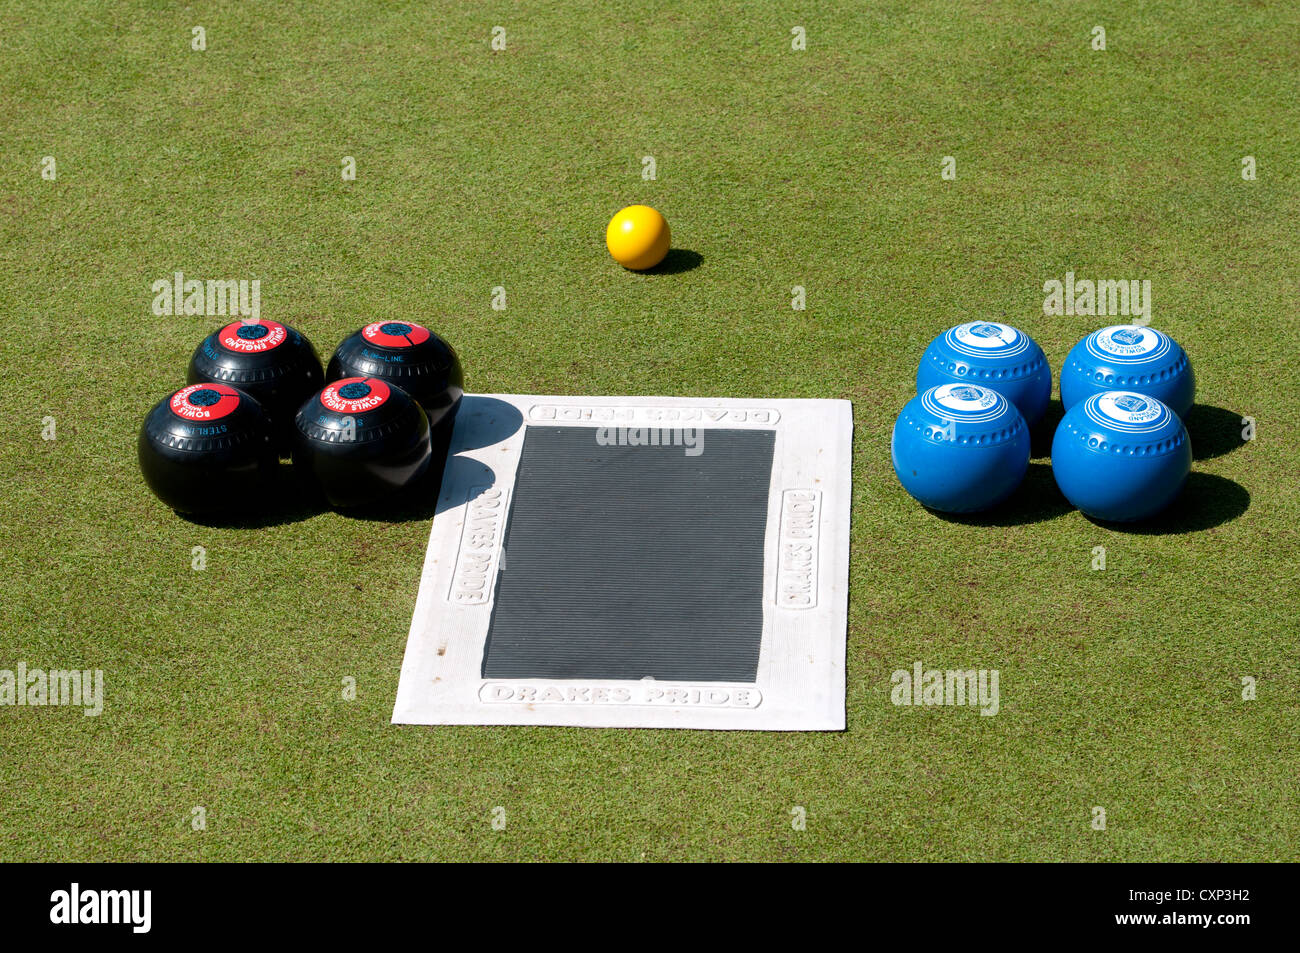 Lawn bowls and mat laid out before a match Stock Photo